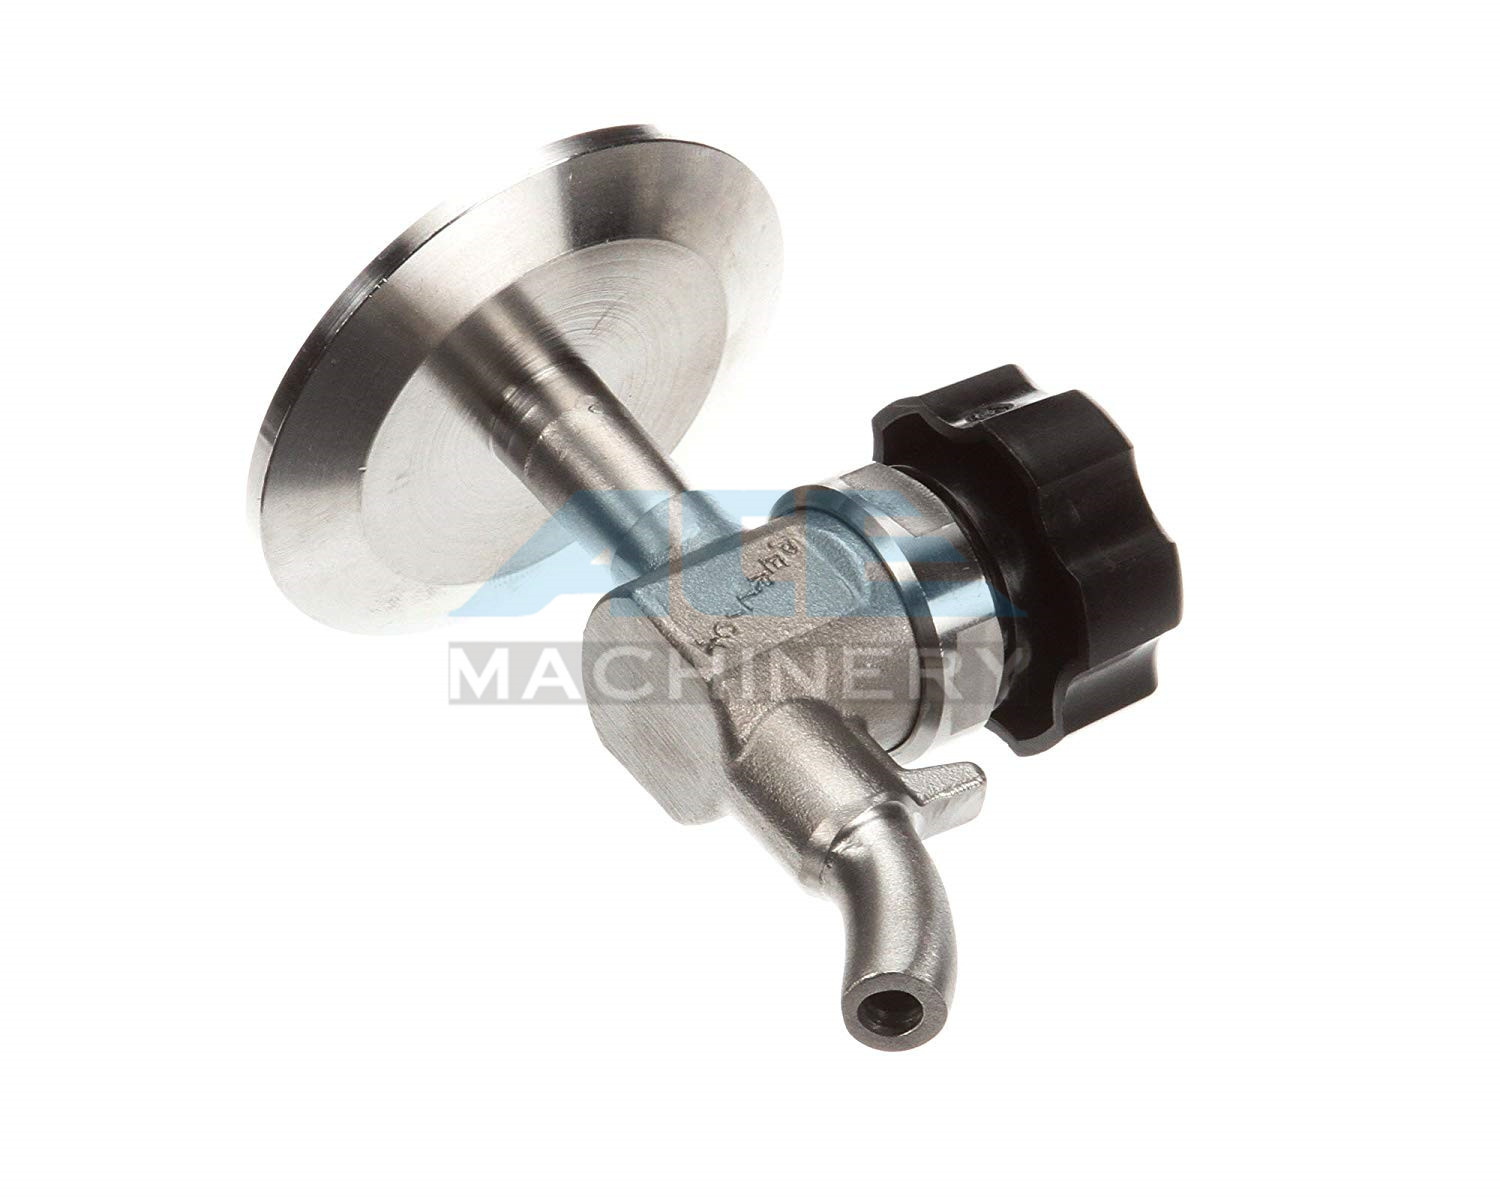 Sanitary Stainless Steel Sample Valve with Tri Clamp Ends Perlick Sample Valve for Beer Brewery